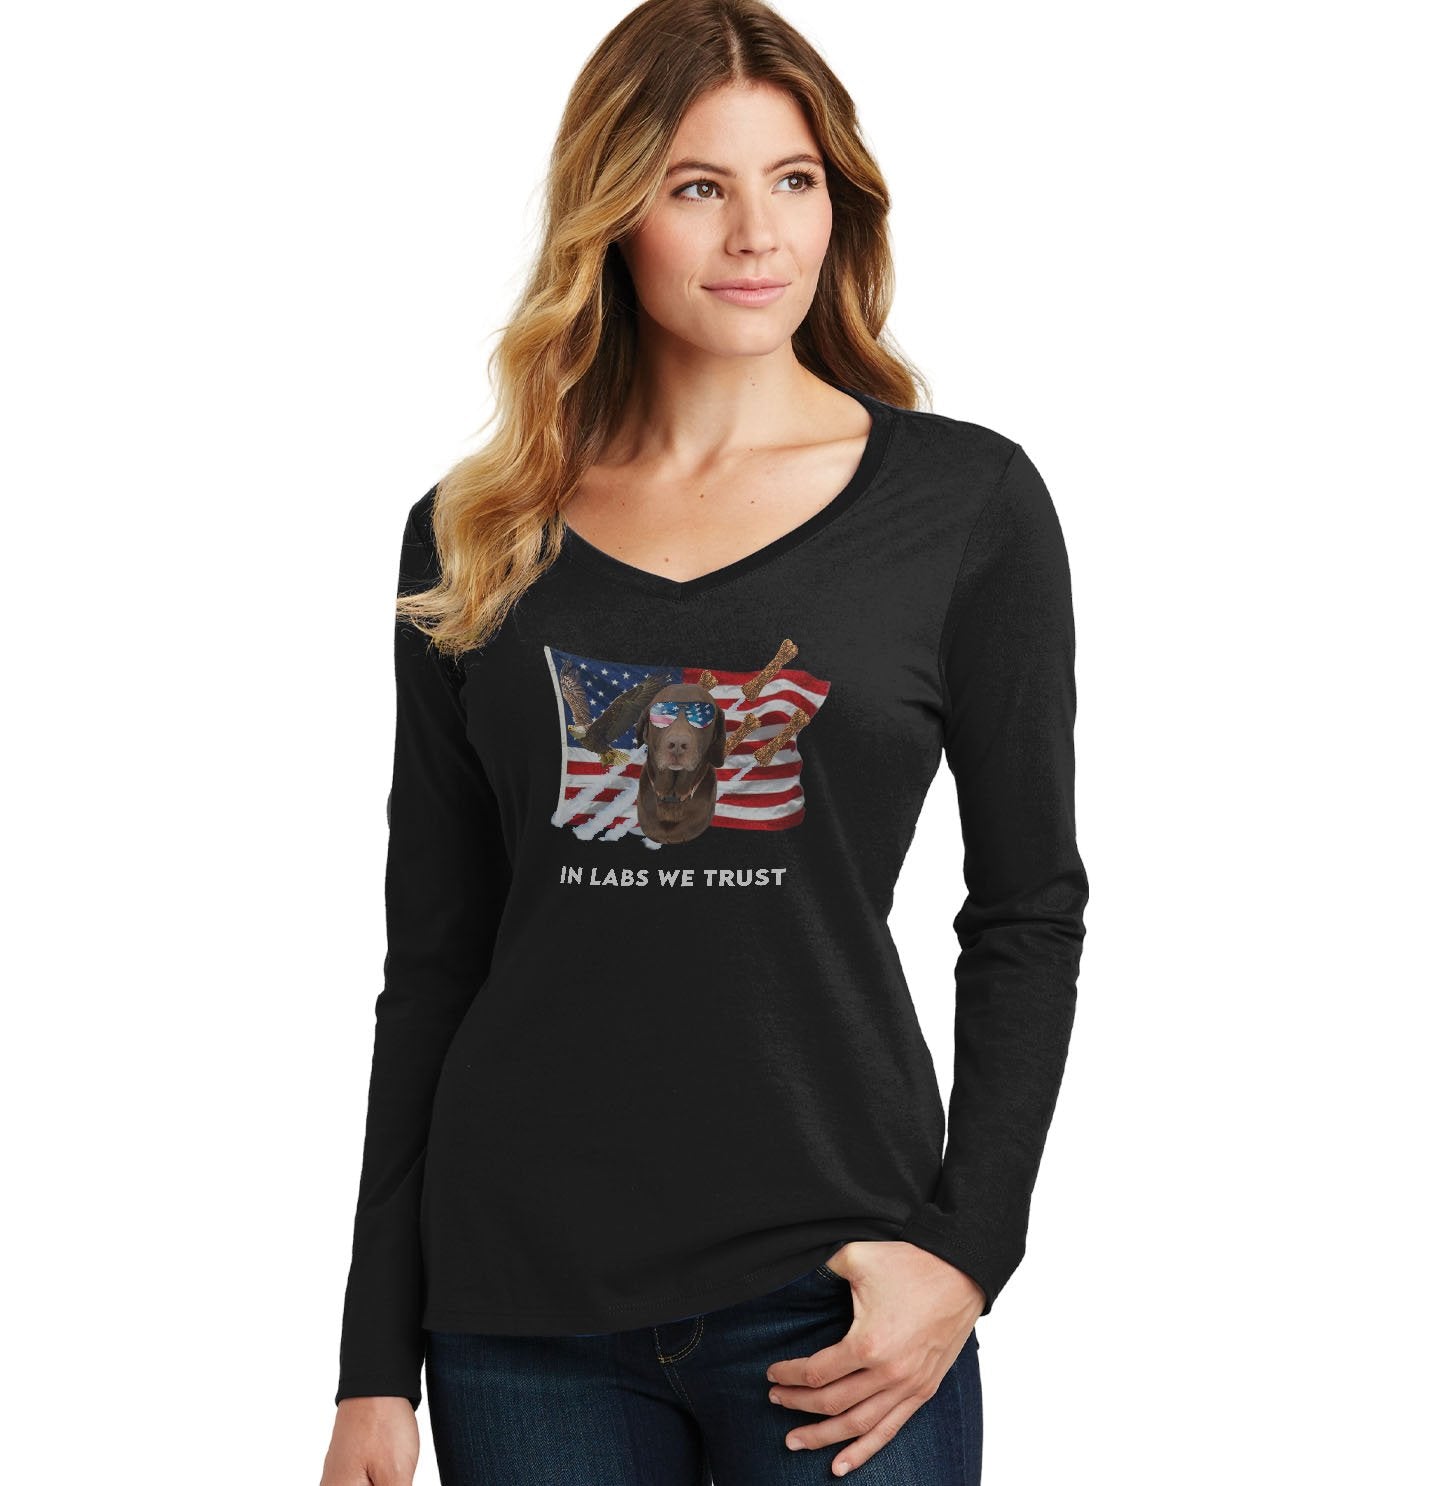 In Lab we Trust Chocolate - Women's V-Neck Long Sleeve T-Shirt